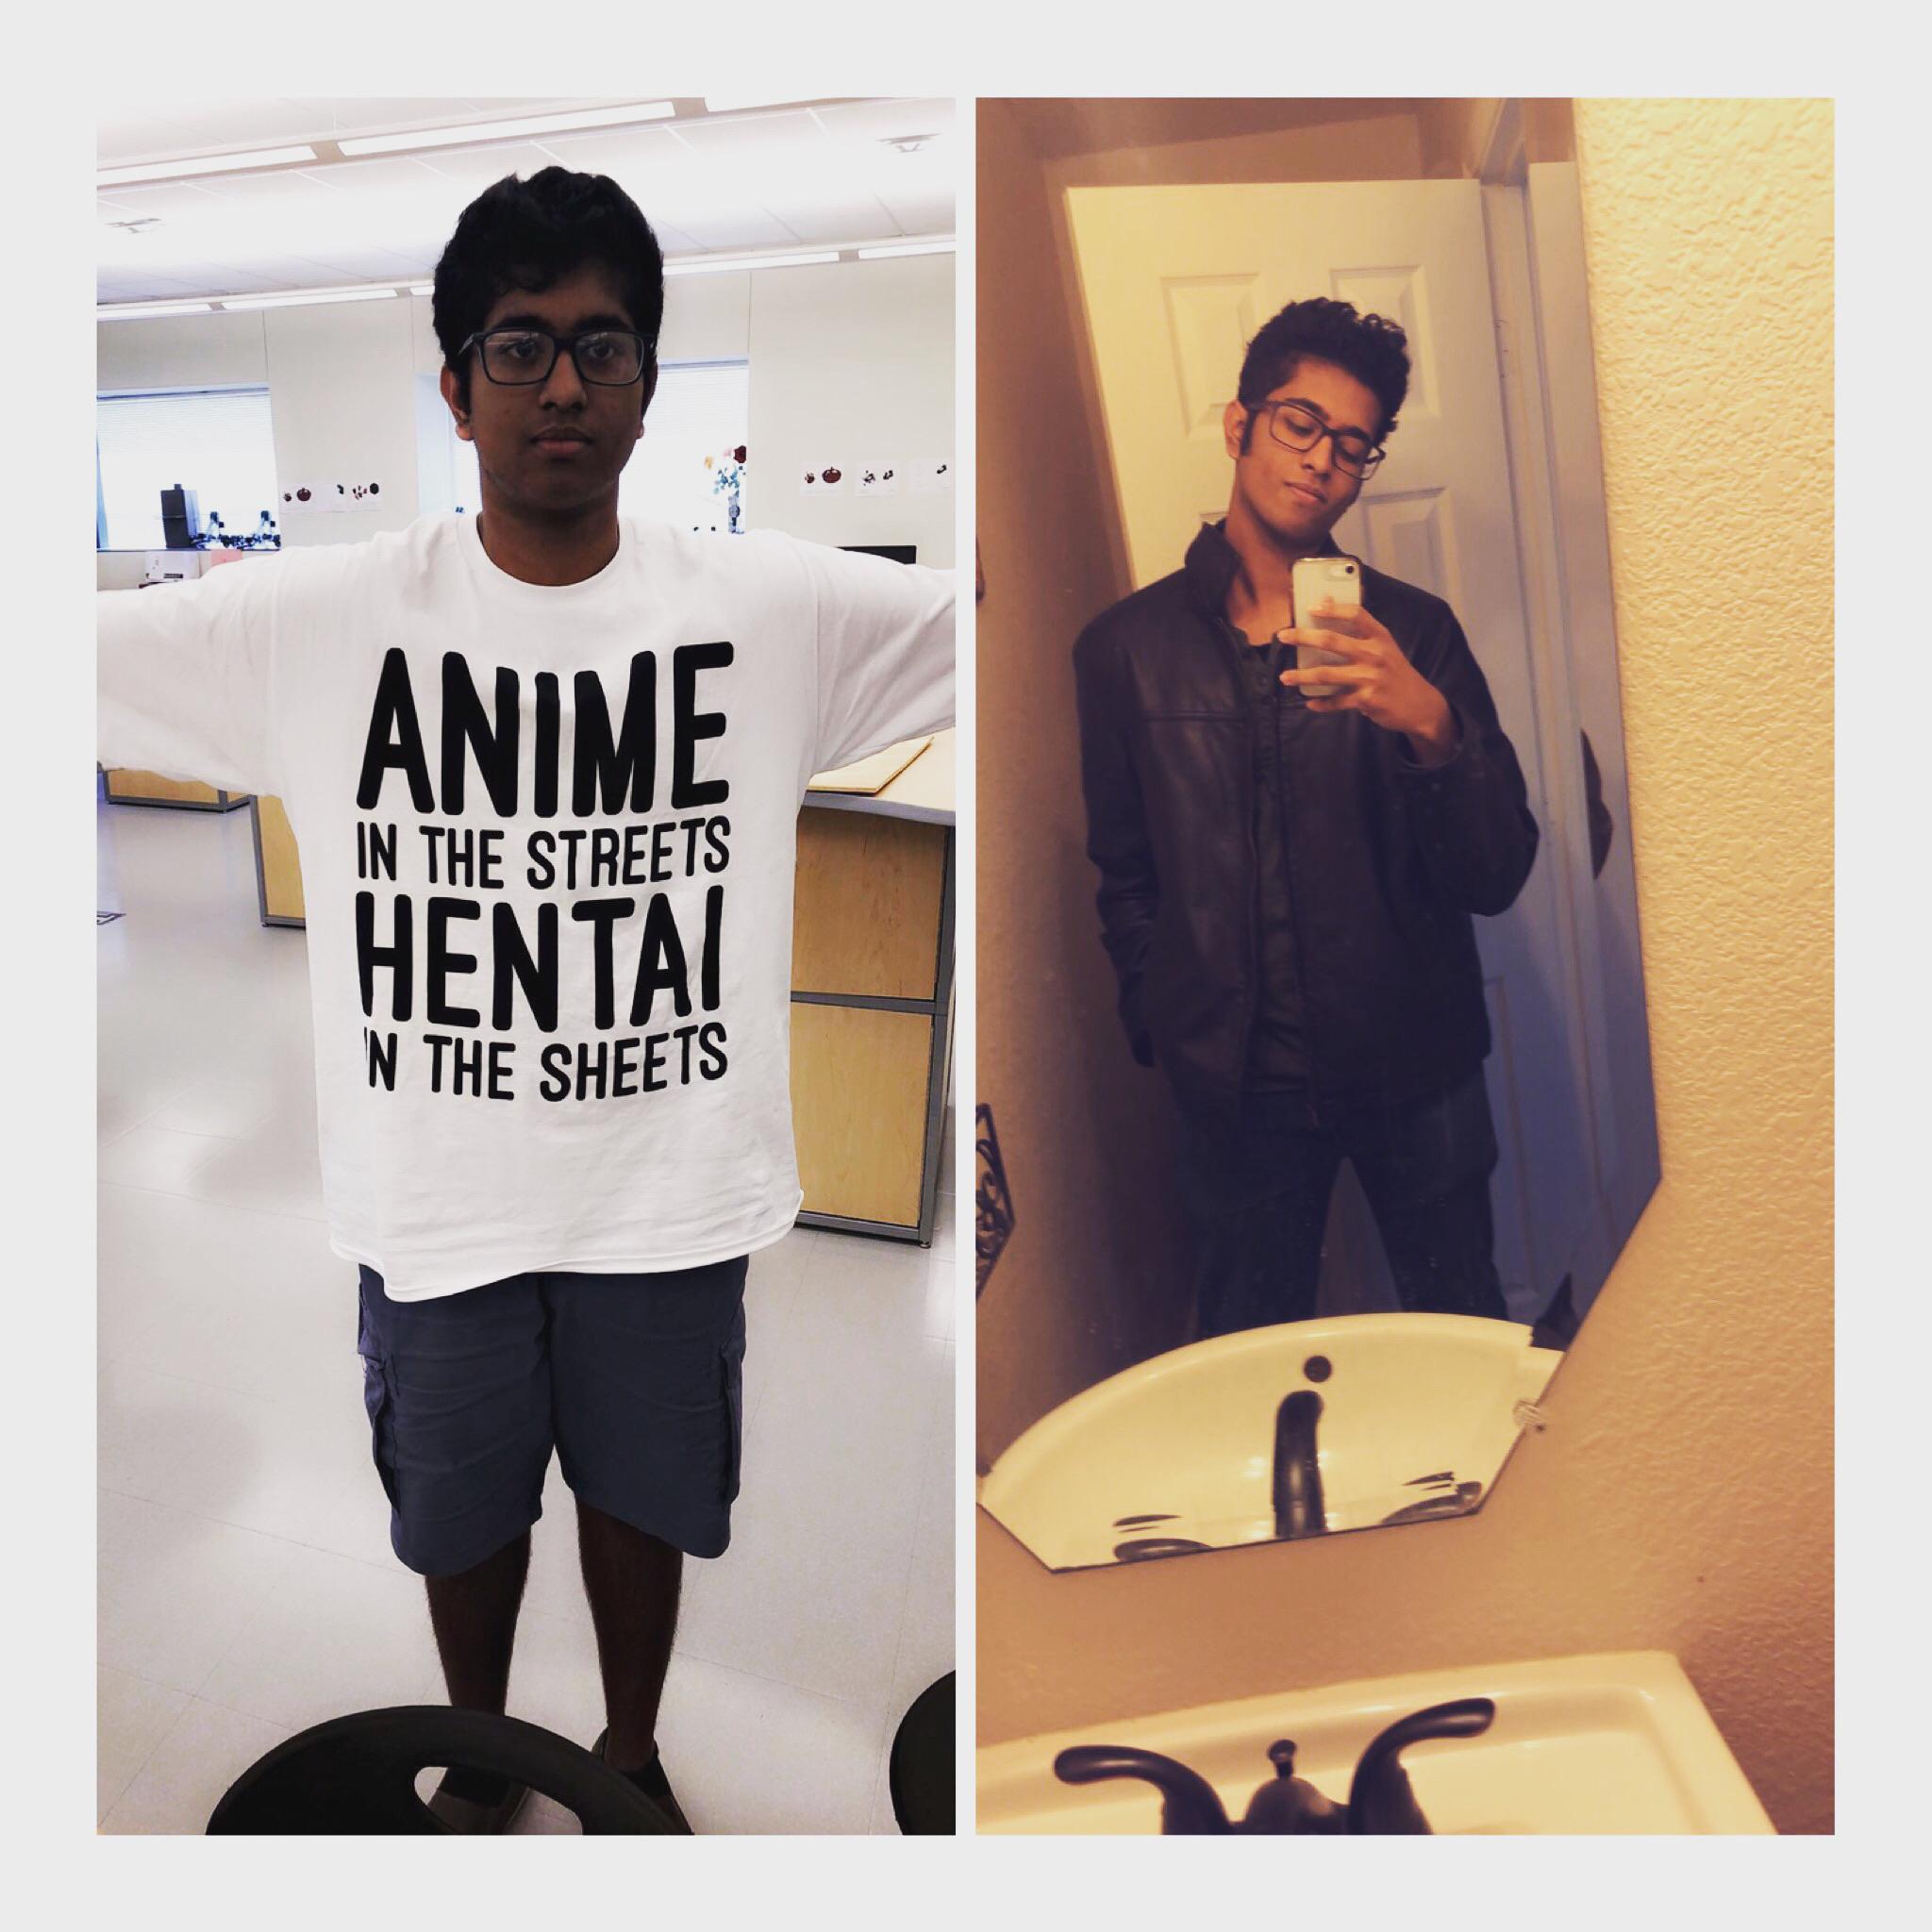 t shirt - Anime Hentai In The Streets N The Sheets